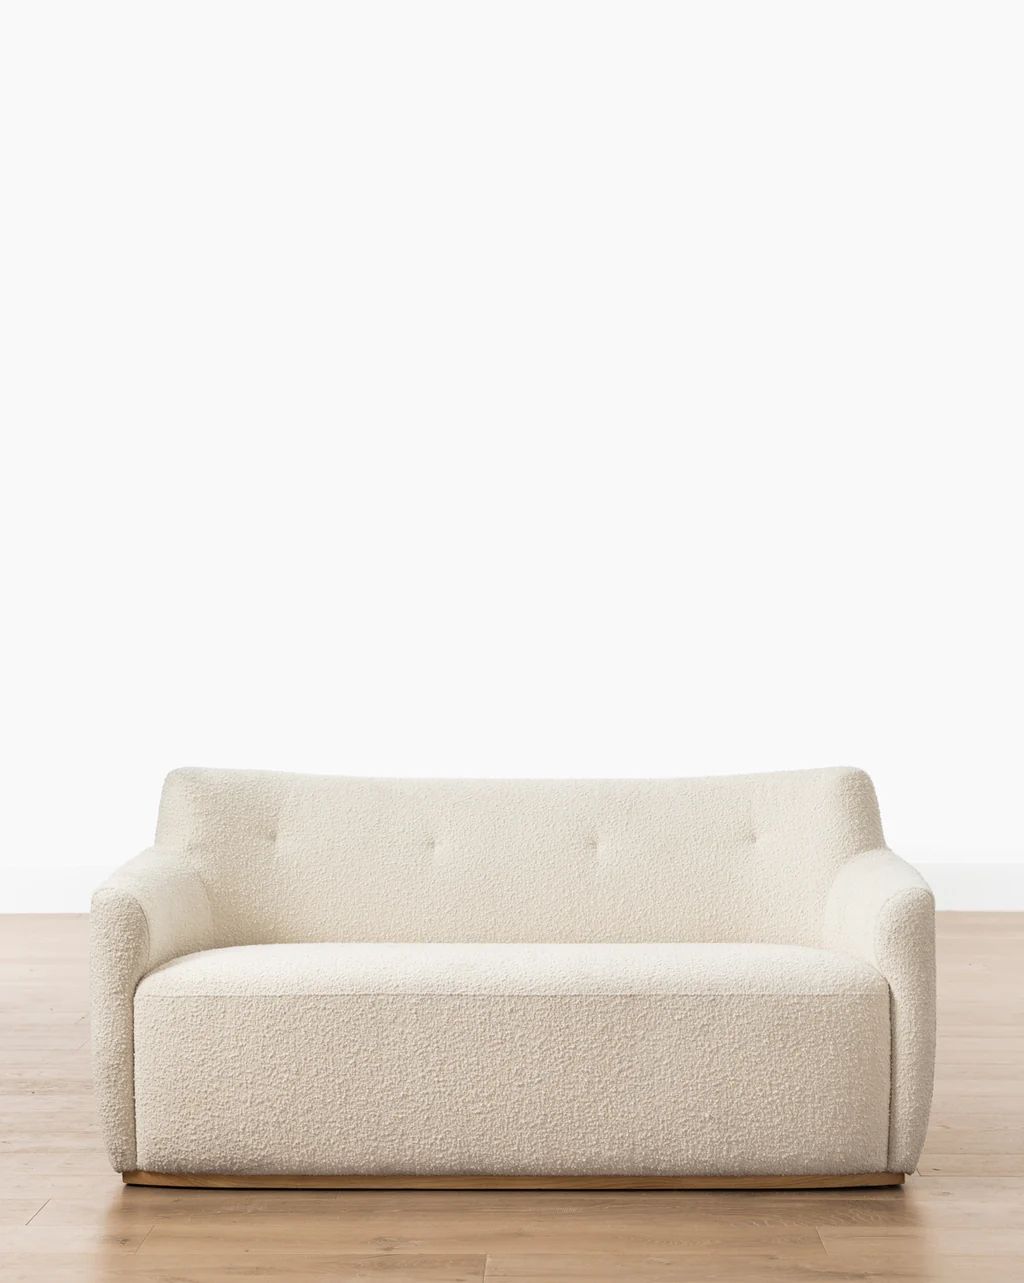 Alford Settee | McGee & Co.